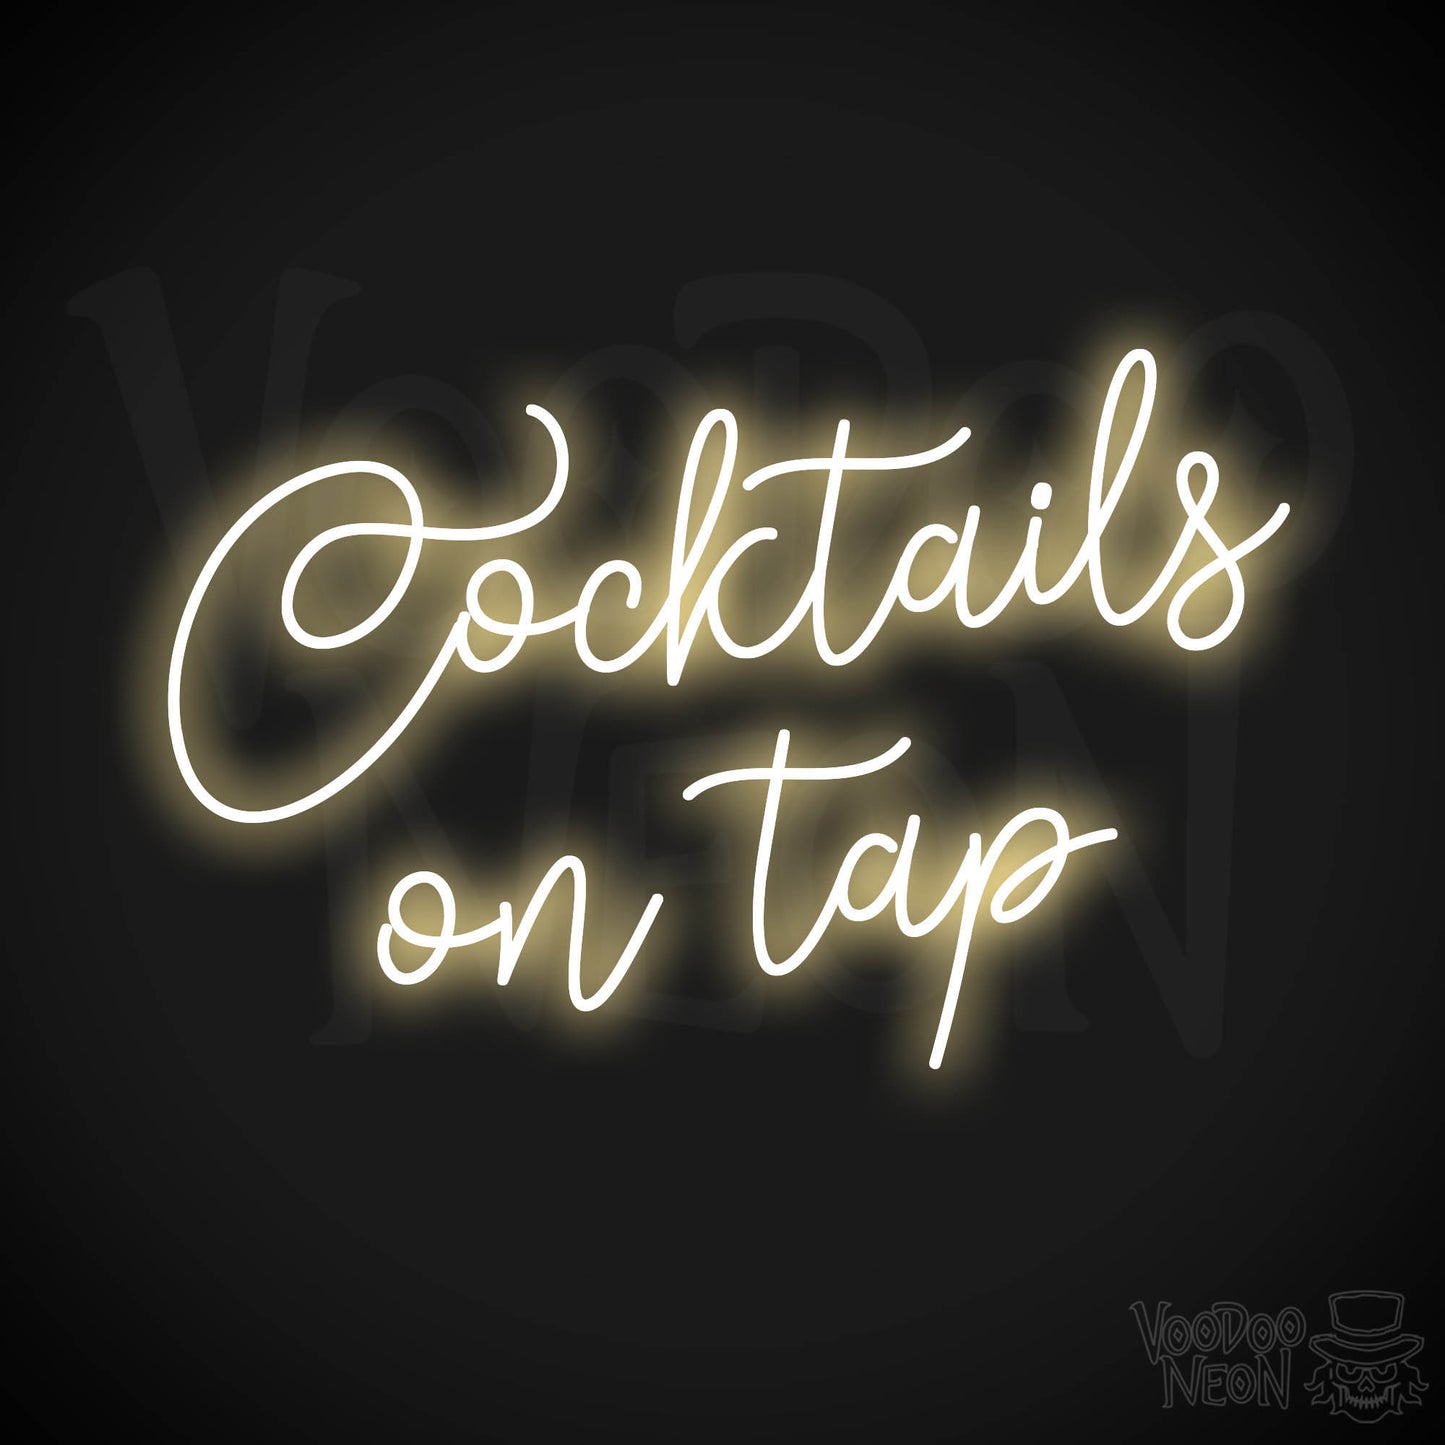 Cocktails On Tap LED Neon - Warm White